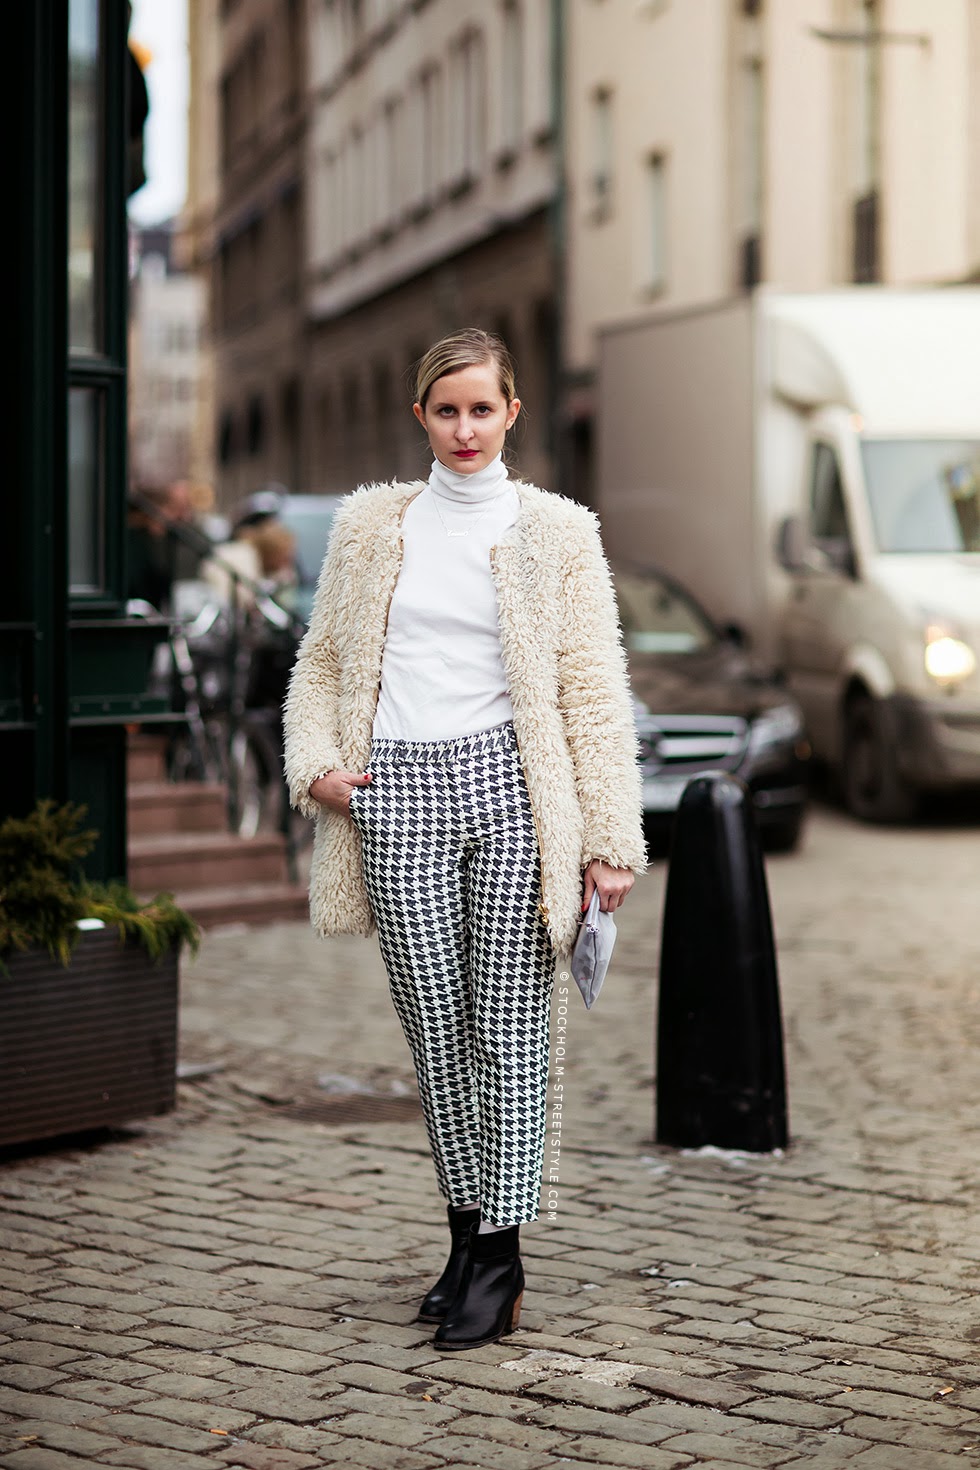 Parisienne: THE MOST STYLISH WAYS TO WEAR A WHITE COAT